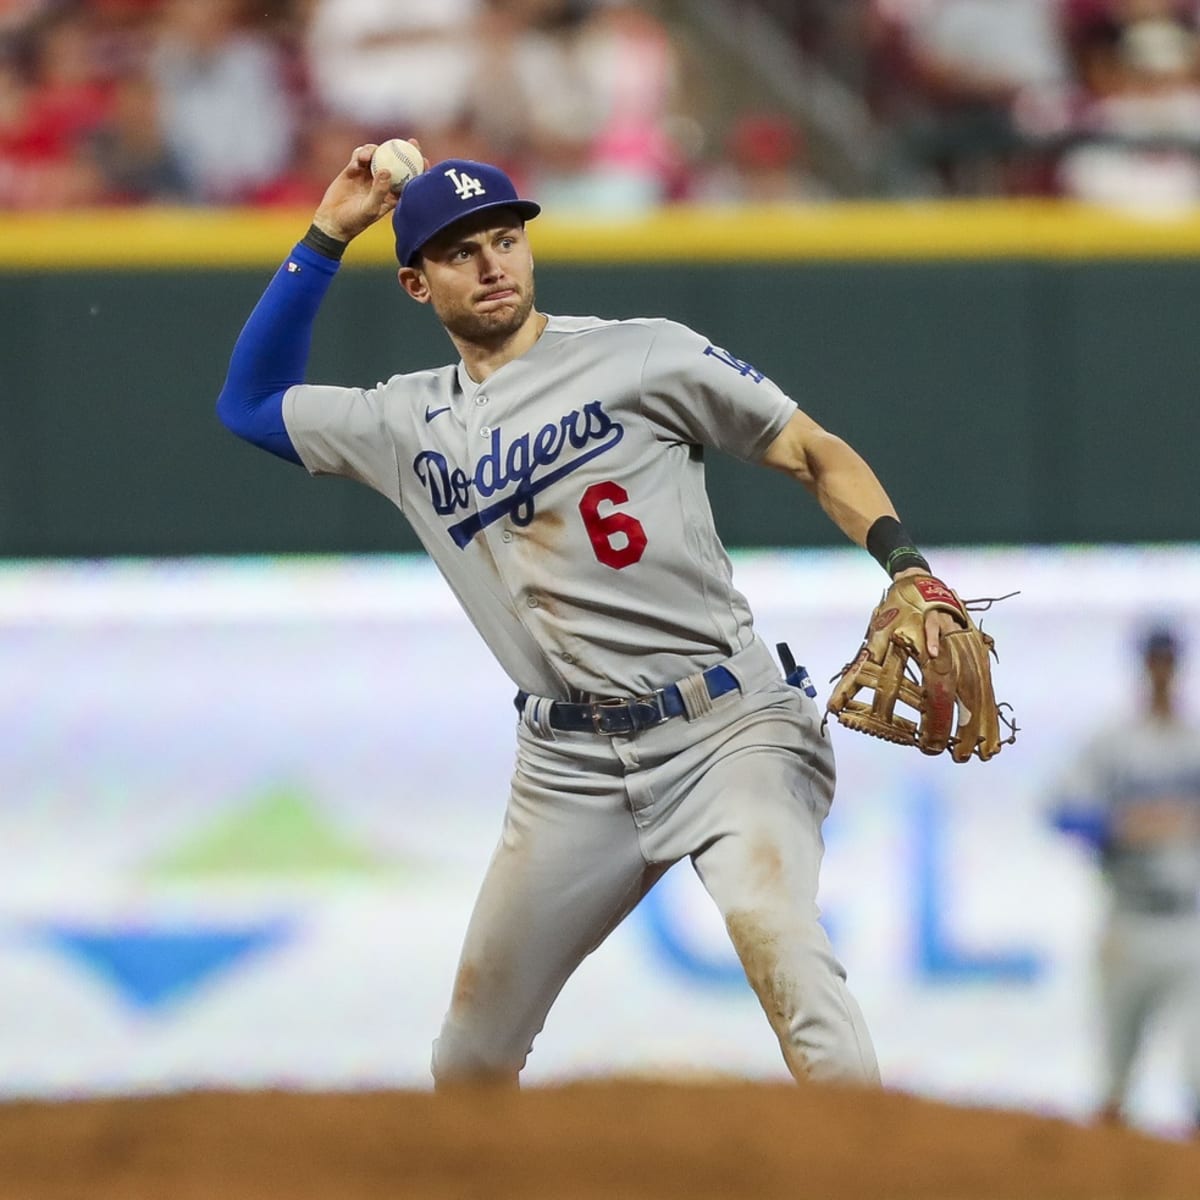 Can Trea Turner's electrifying game propel another Dodgers run